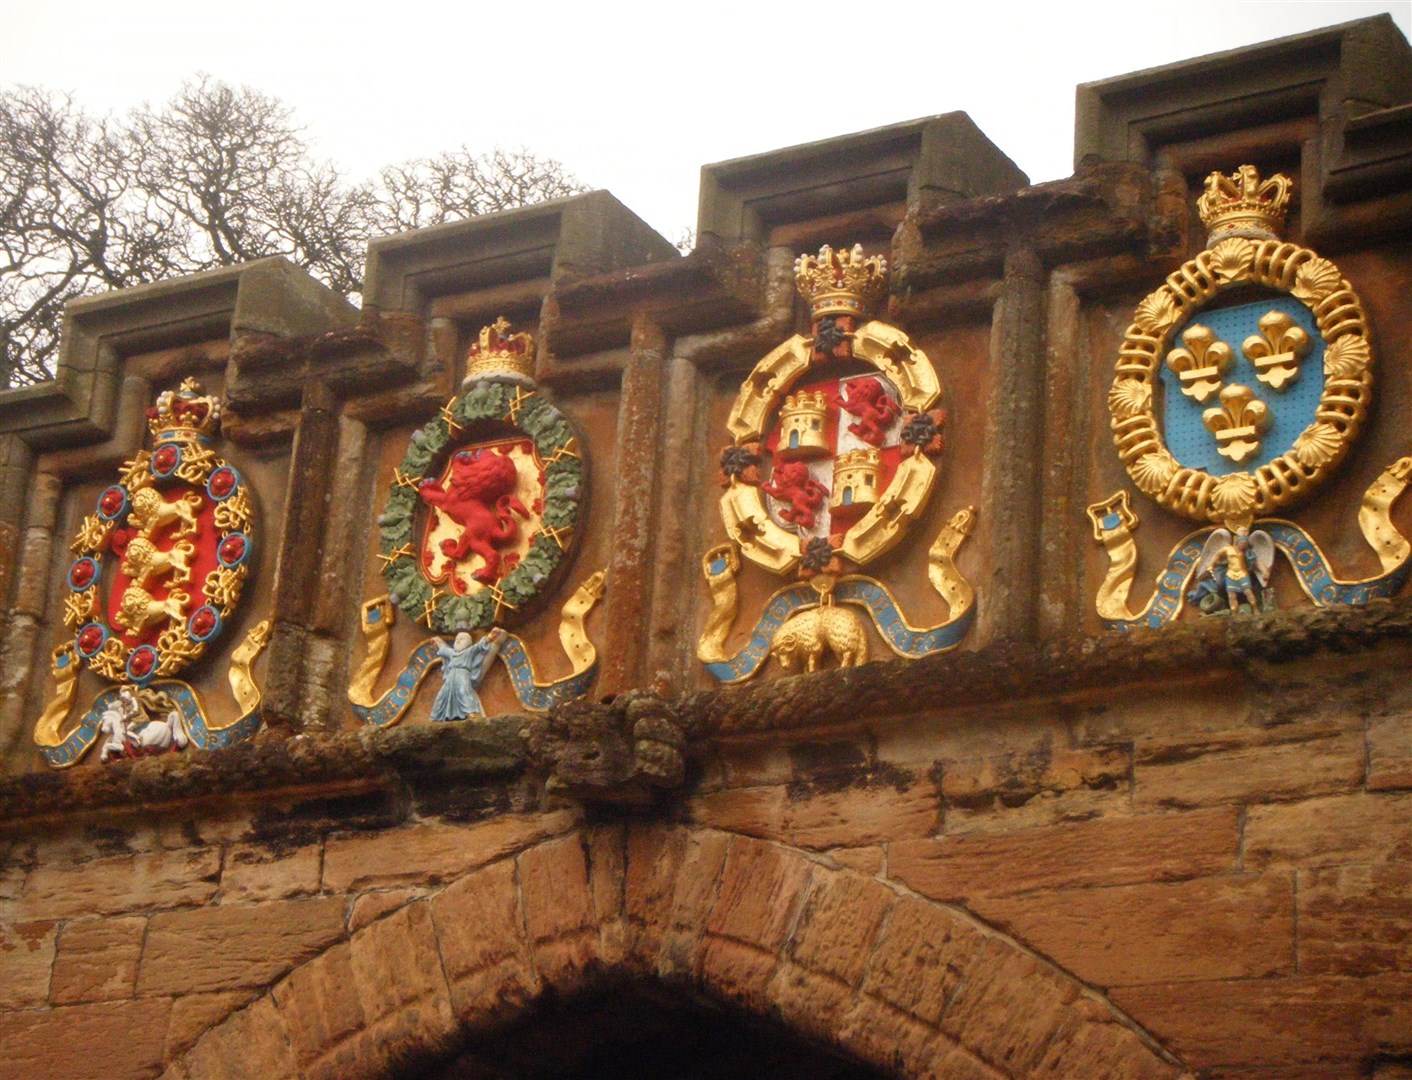 Kings and Queens Tour: the royal arms displayed at Linlithgow Palace